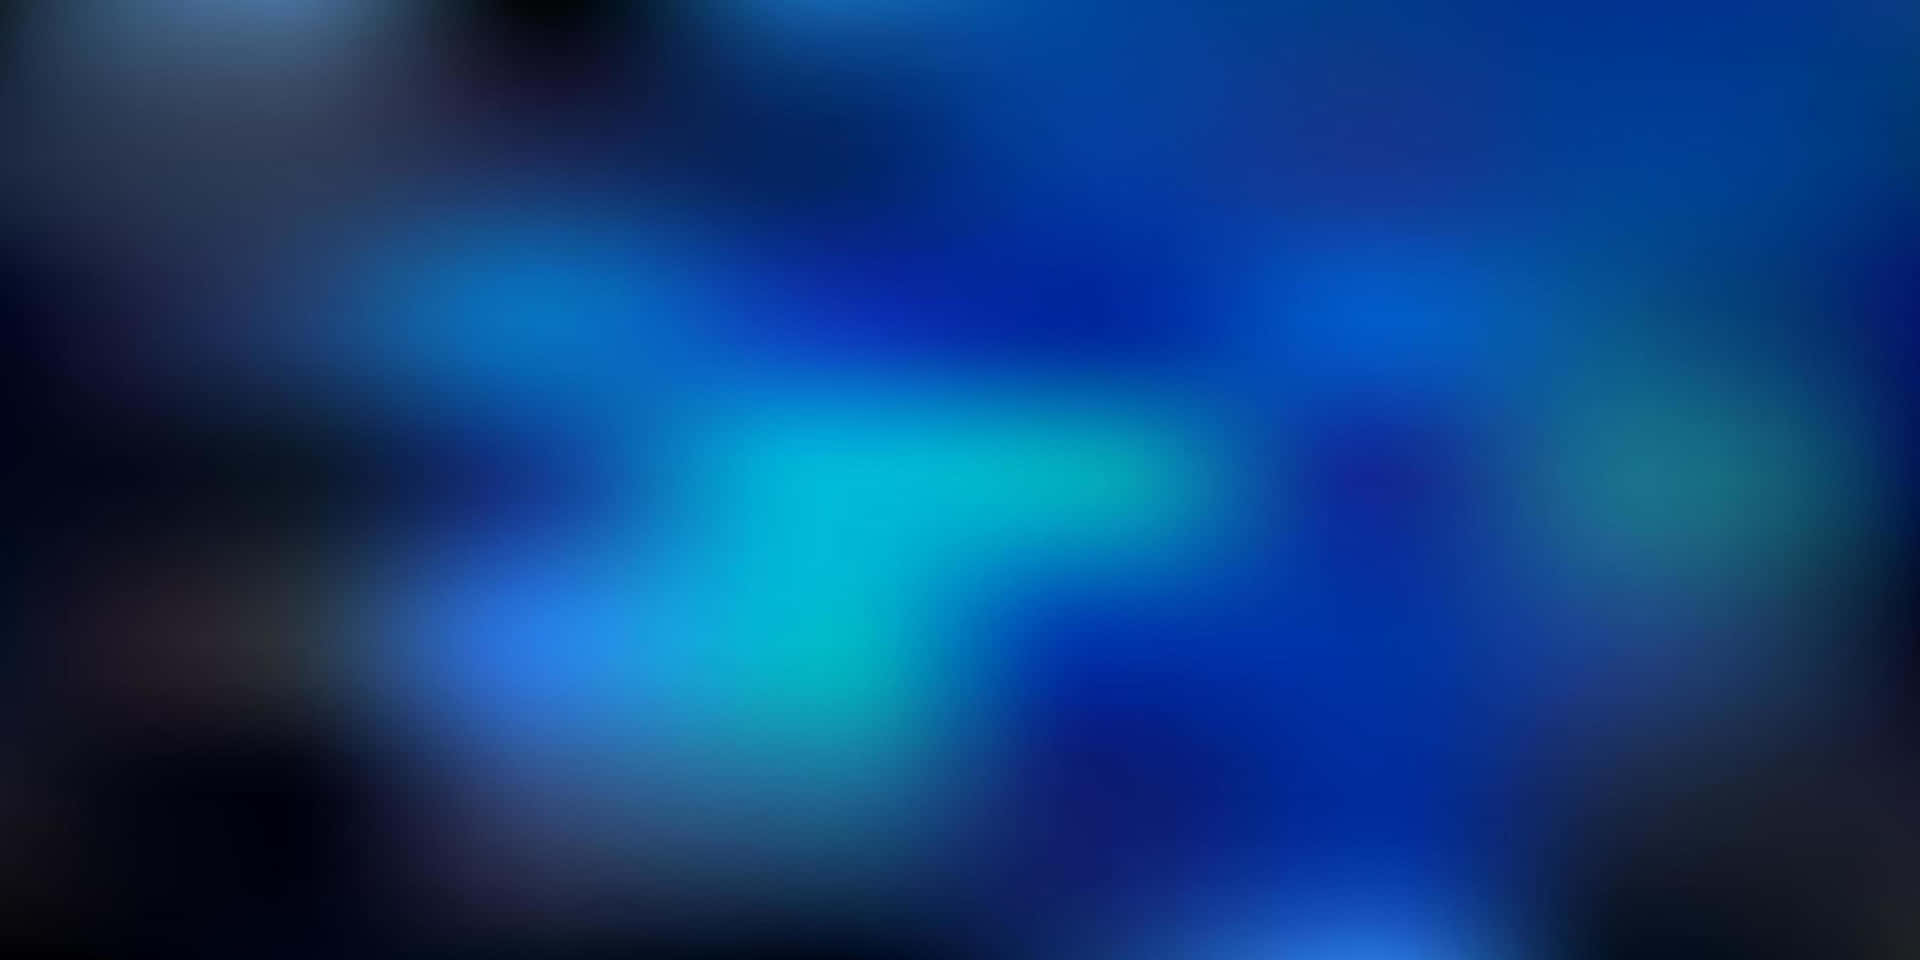 A Blurry Blue Background With A Blue Light